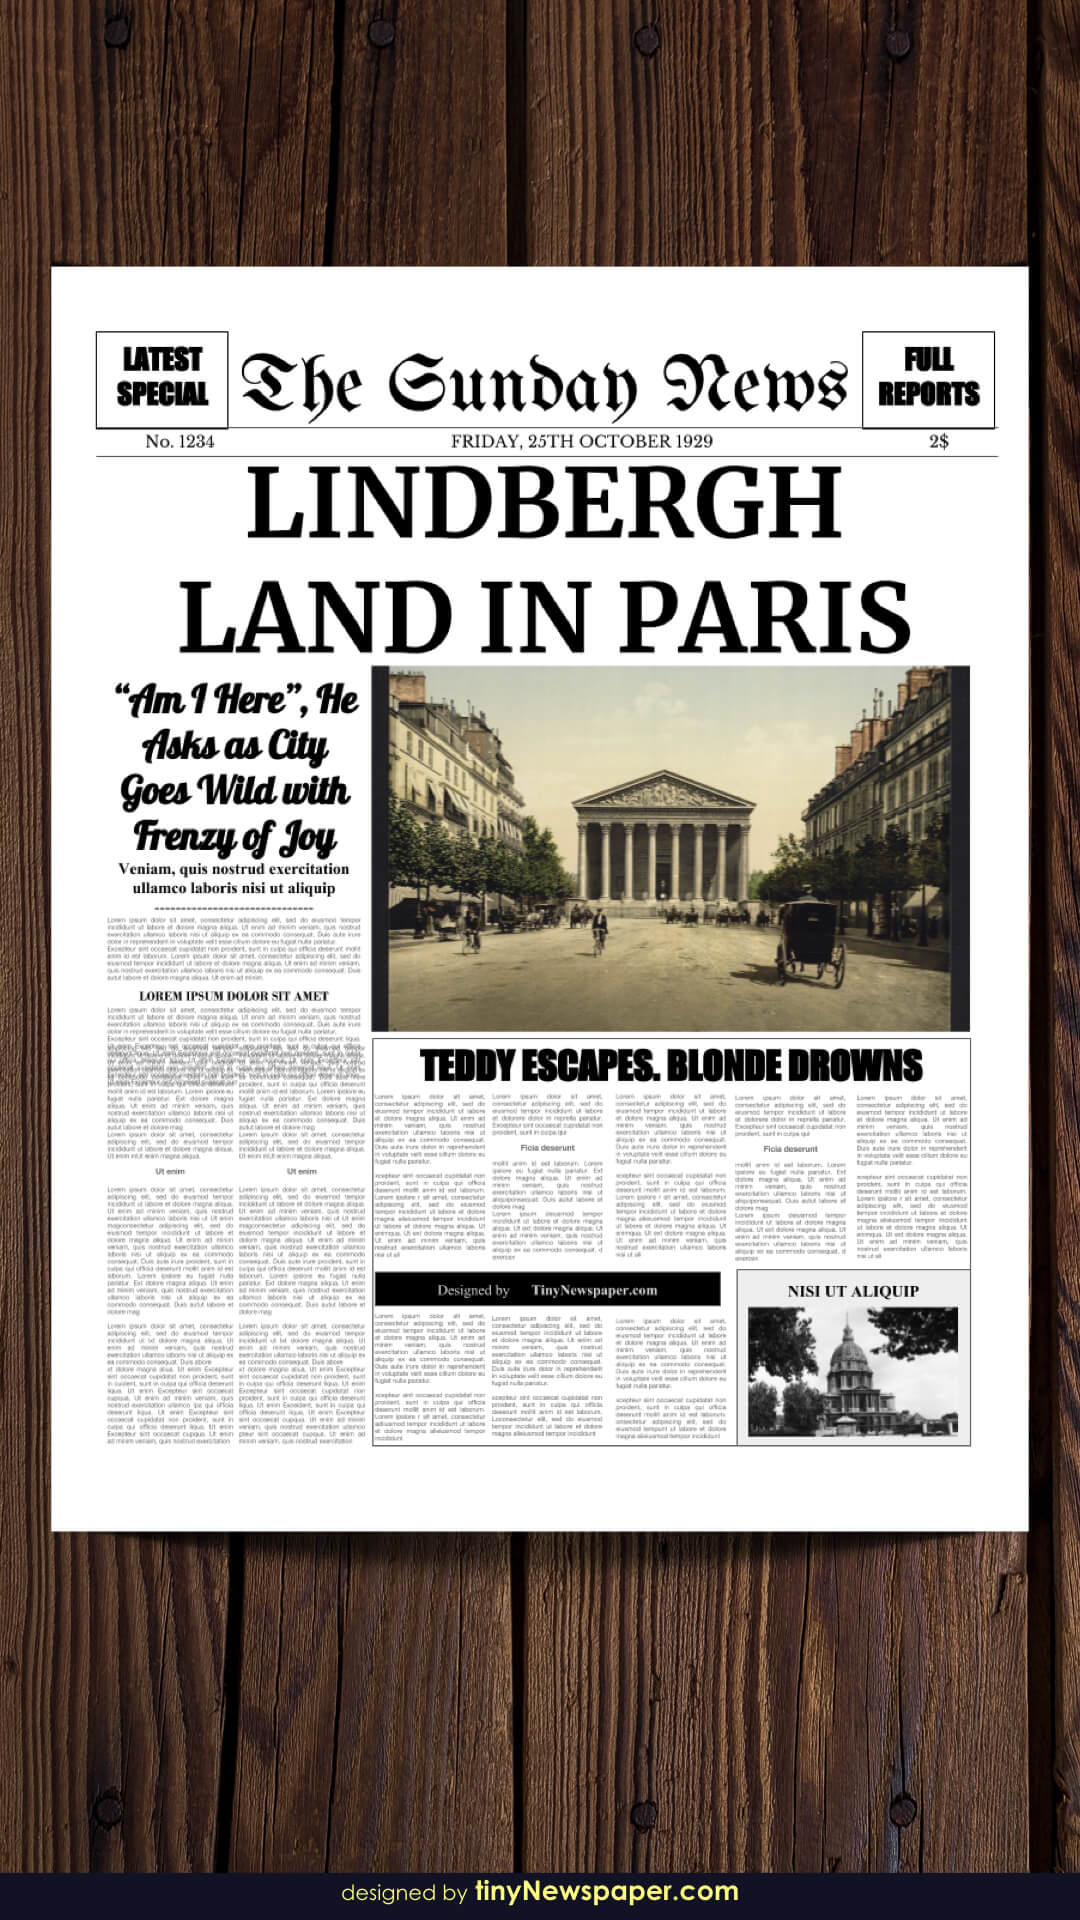 Powerpoint Newspaper Template In Newspaper Template For Powerpoint